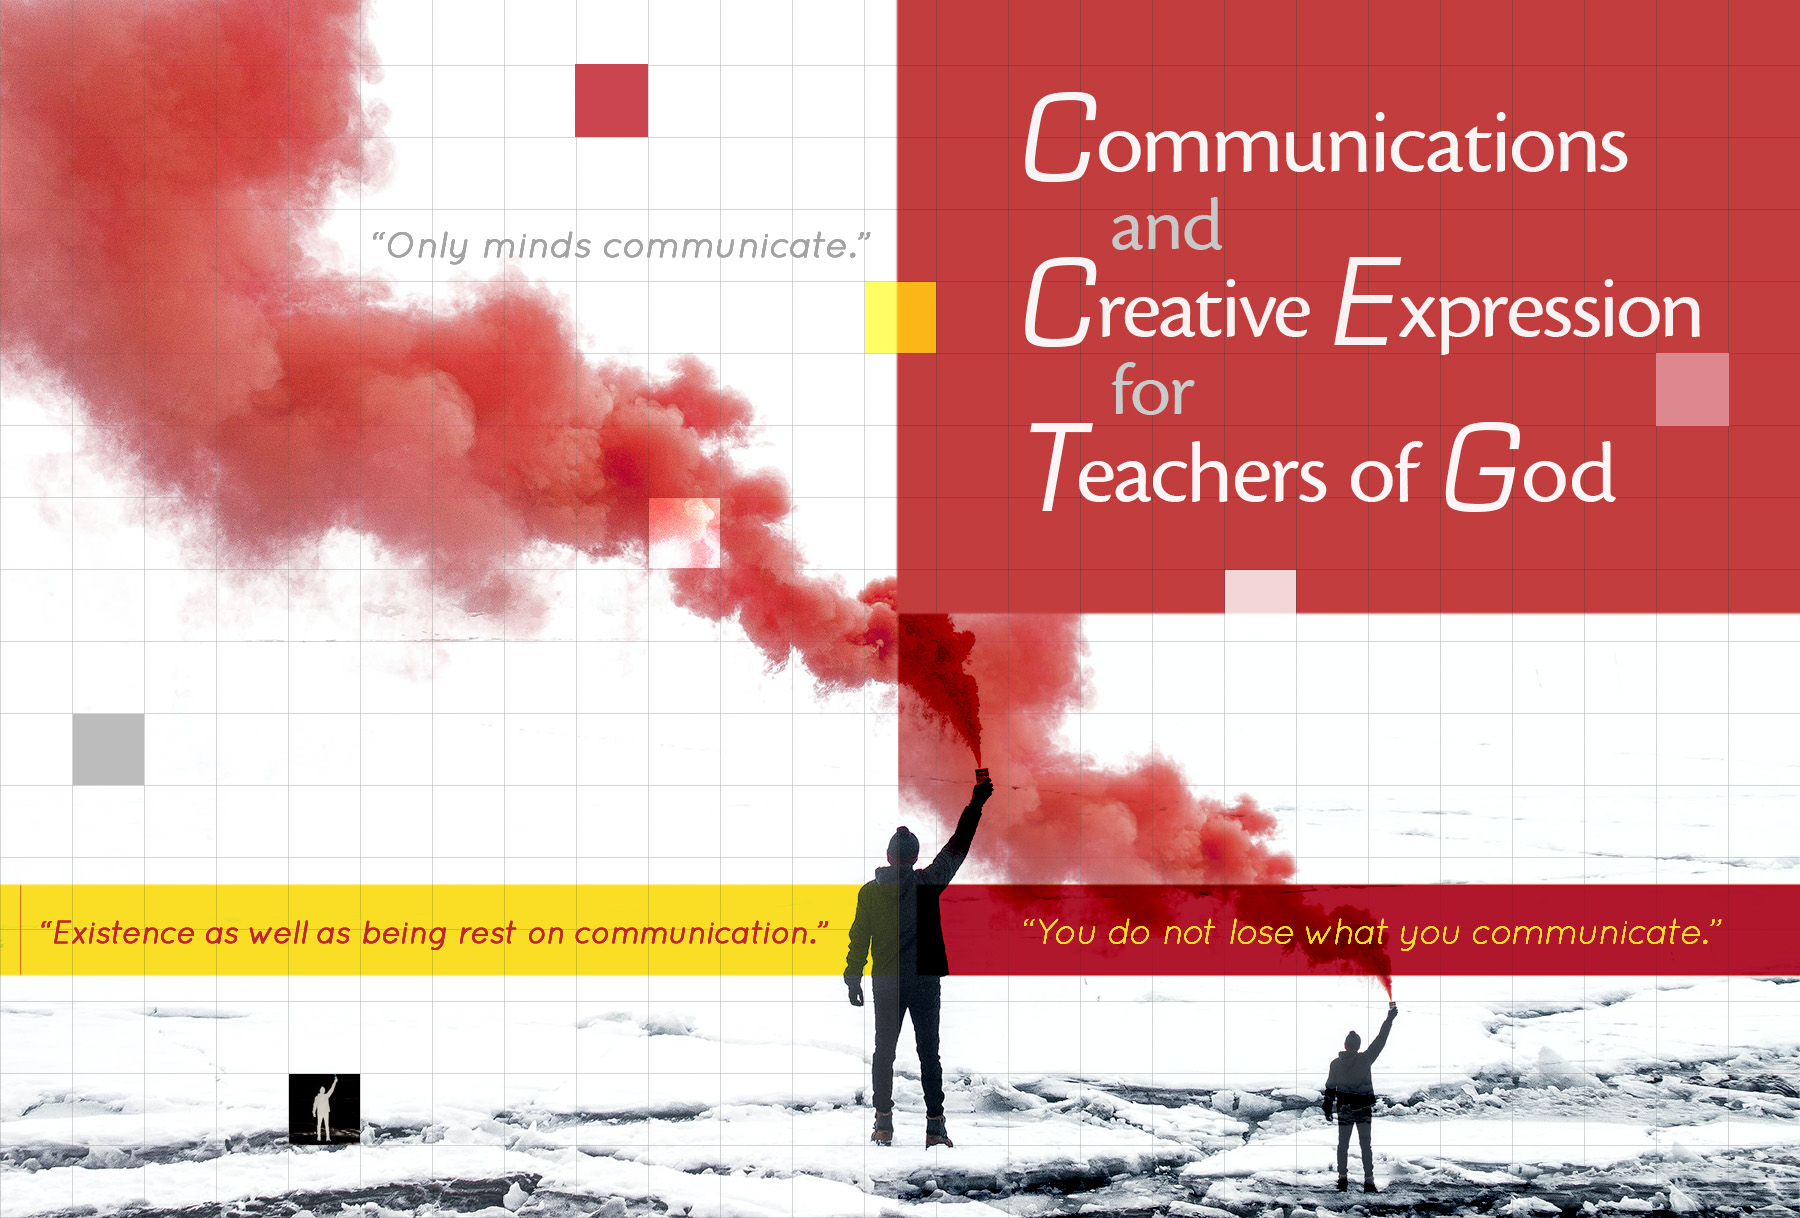 Communications and creative expression for teachers of God.